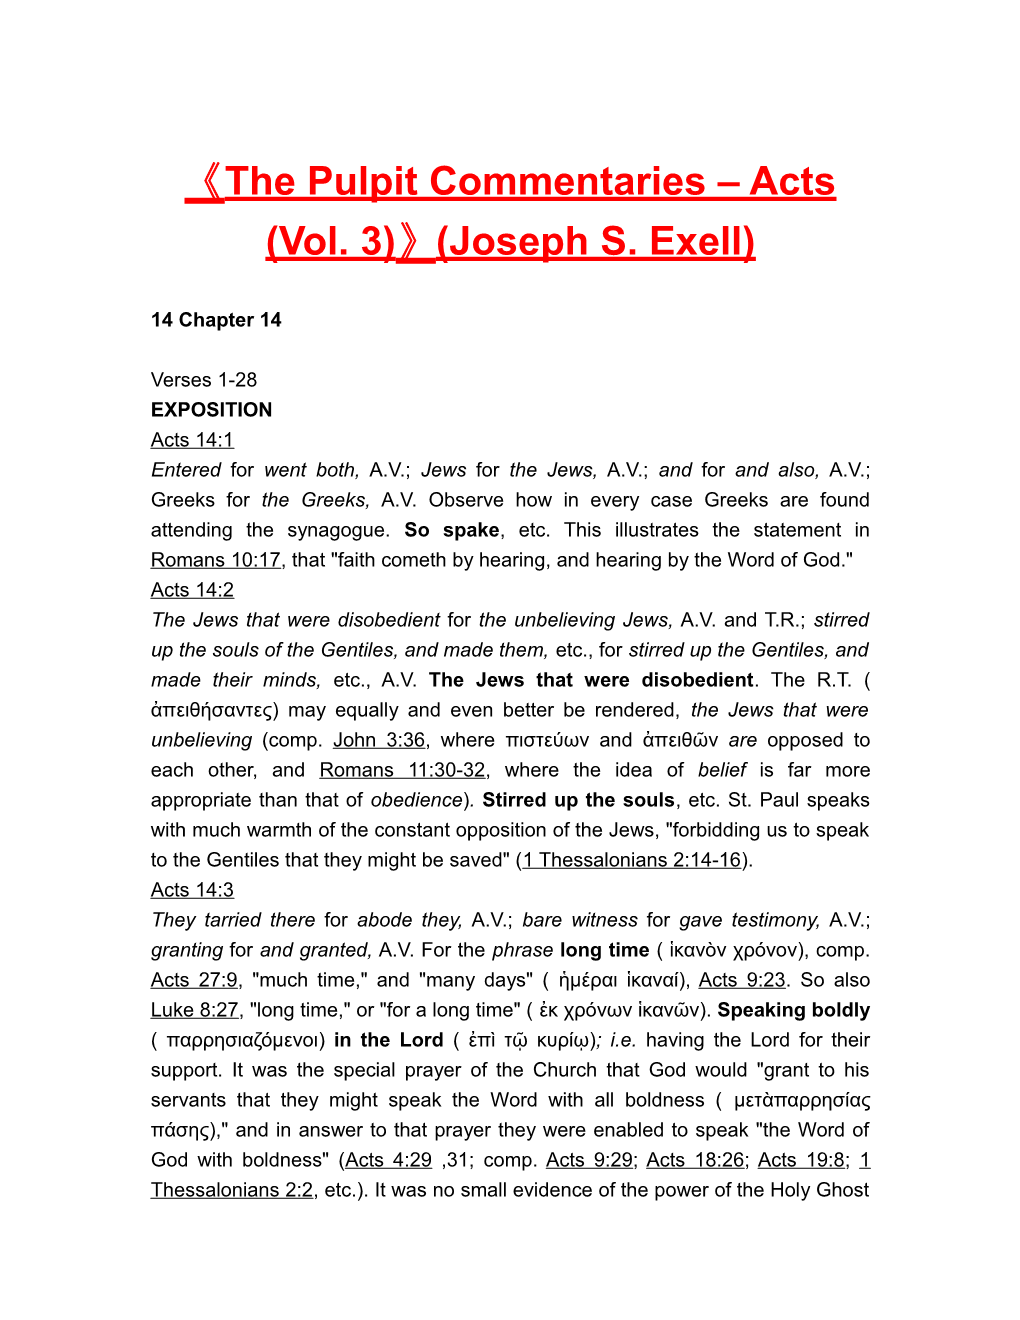 The Pulpit Commentaries Acts (Vol. 3) (Joseph S. Exell)